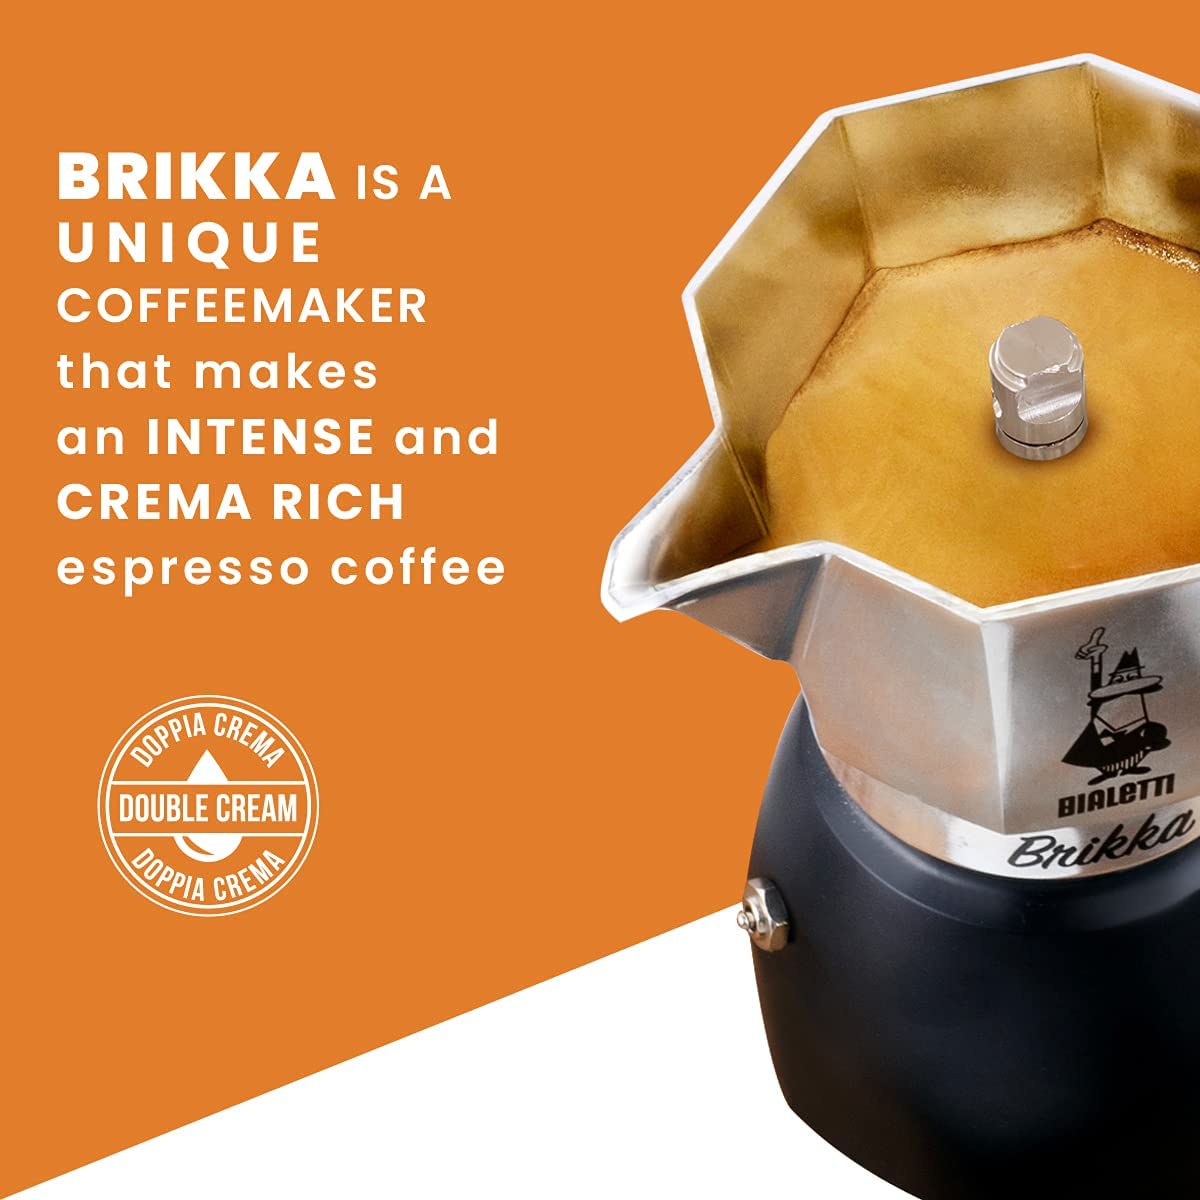 Bialetti New Brikka, Moka Pot, the only coffee maker capable of